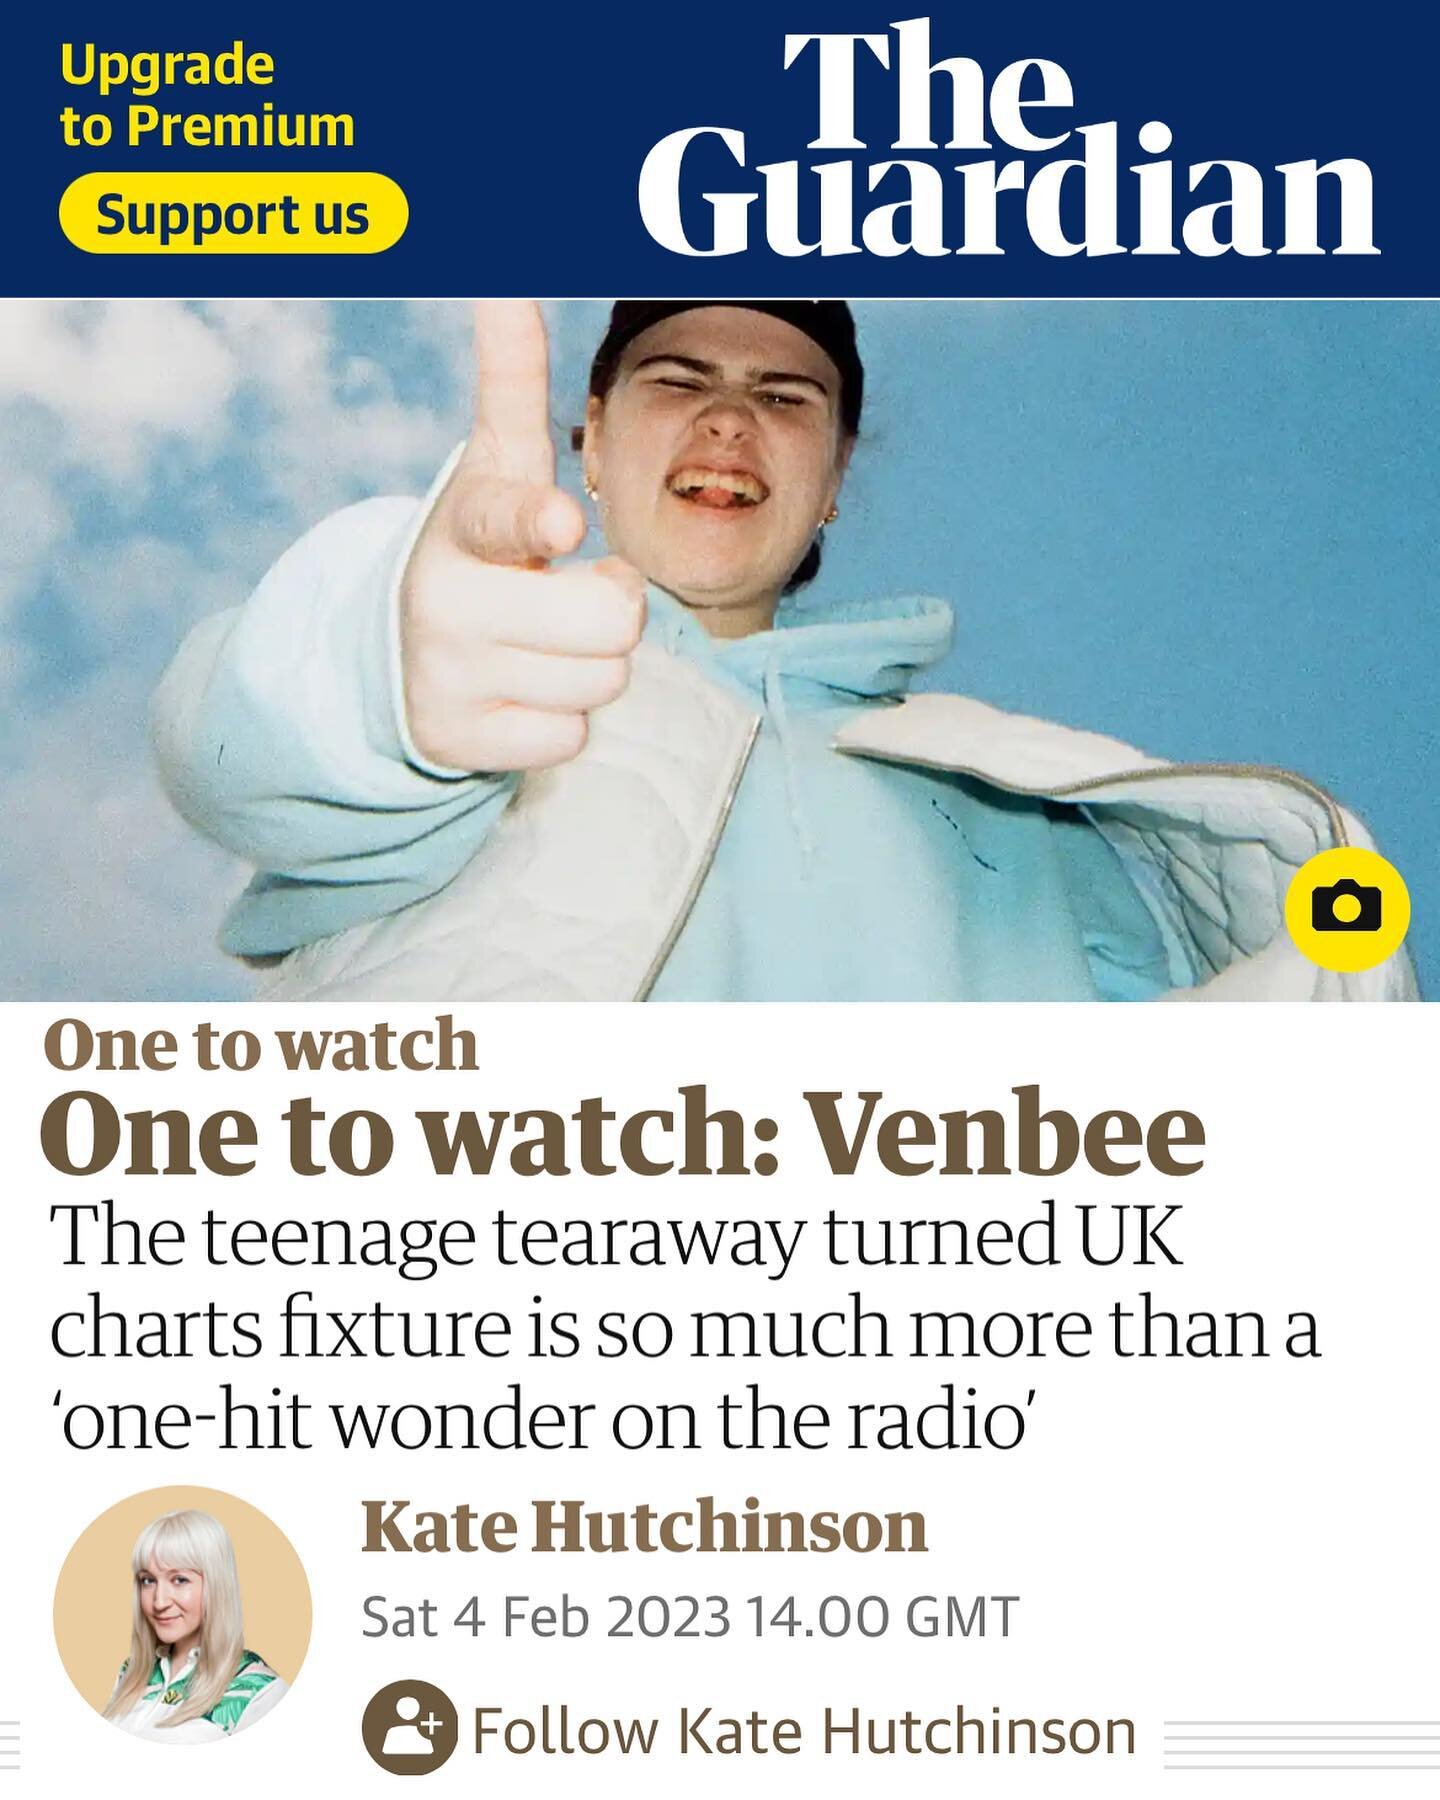 The Observer made Venbee one of their 'Ones To Watch' this weekend (also on TheGuardian.com). Thx to @katehutchinsonpow for the write up!